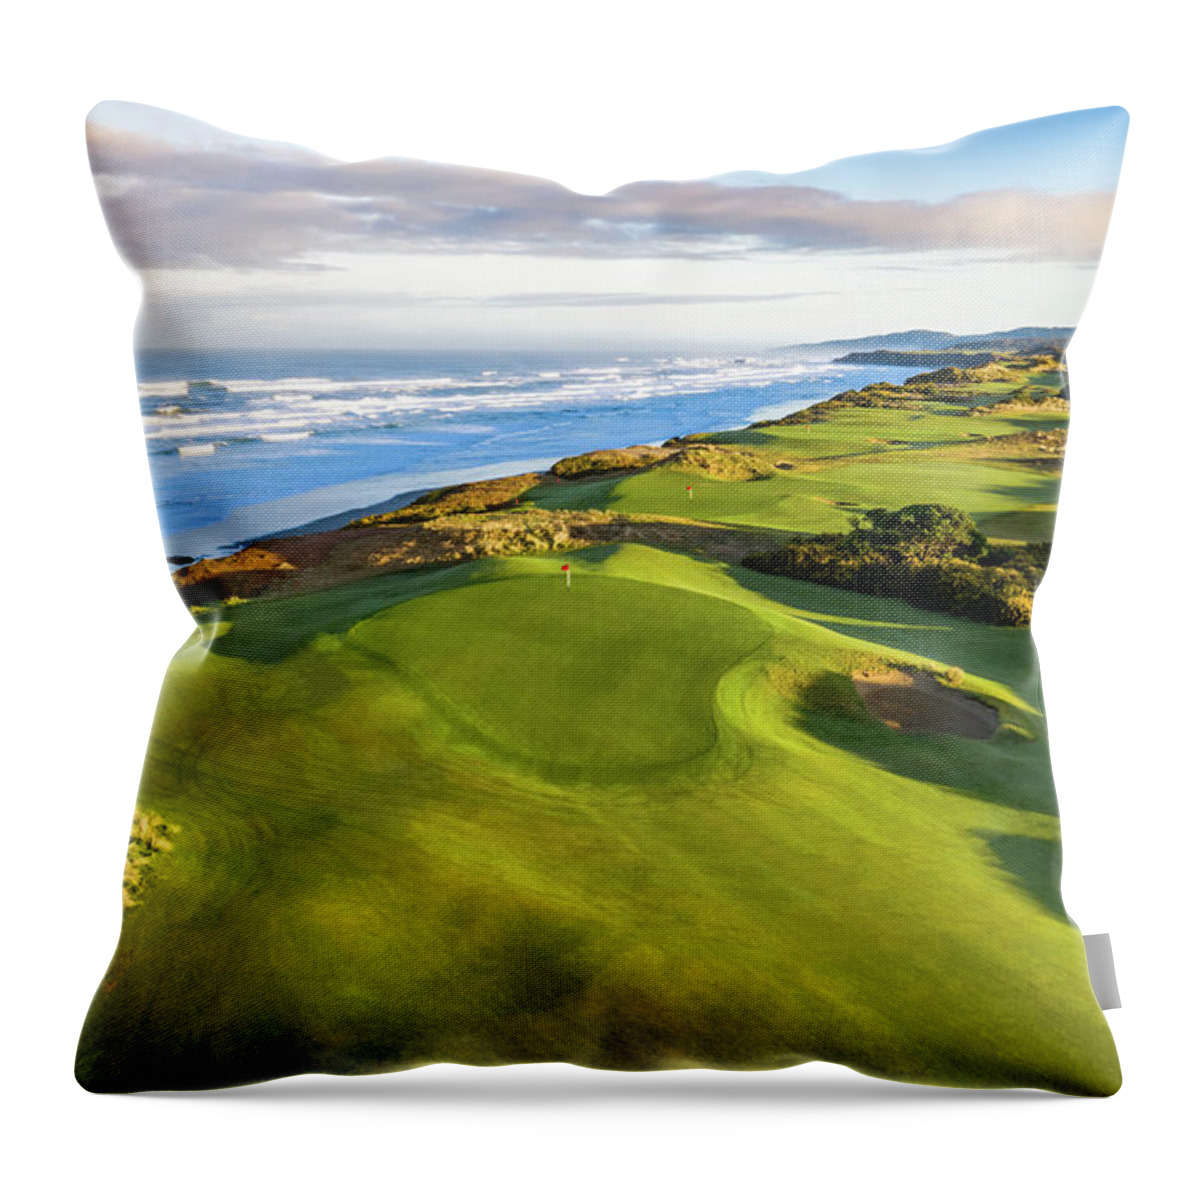 Bandon Dunes Throw Pillow featuring the photograph Bandon Dunes Hole 15 v2 by Mike Centioli